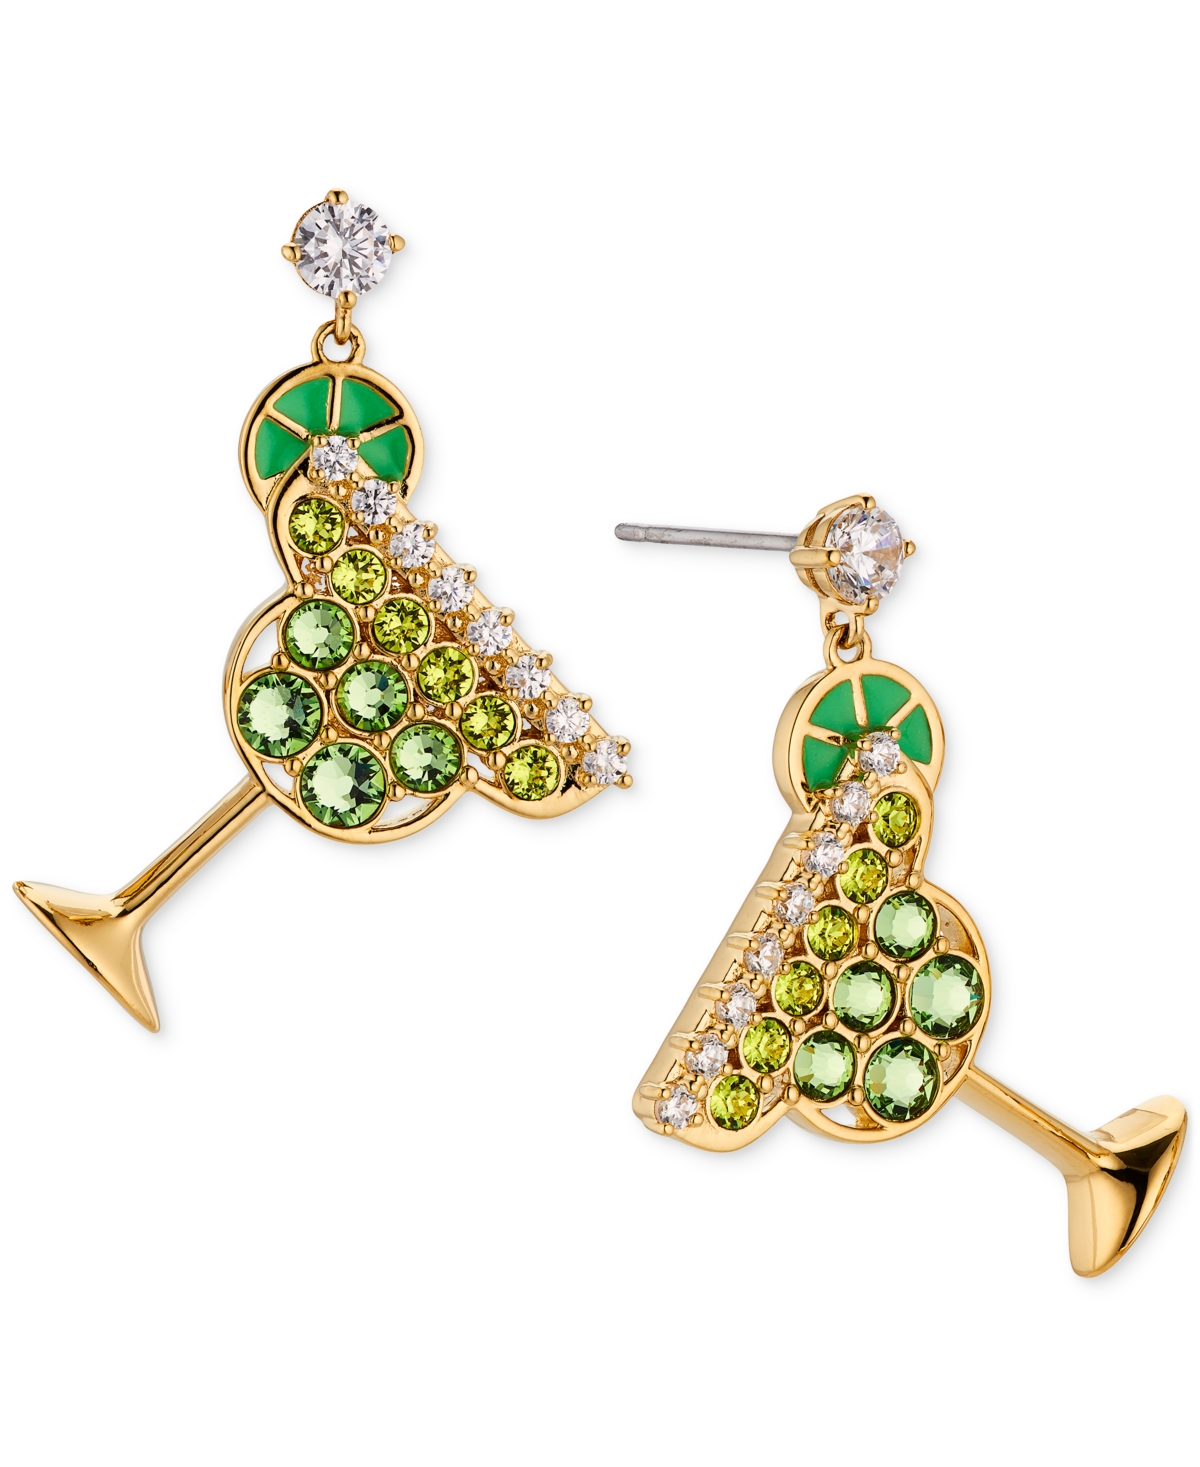 by Nadri 18k Gold-Plated Pave & Color Crystal Margarita Drop Earrings - Gold